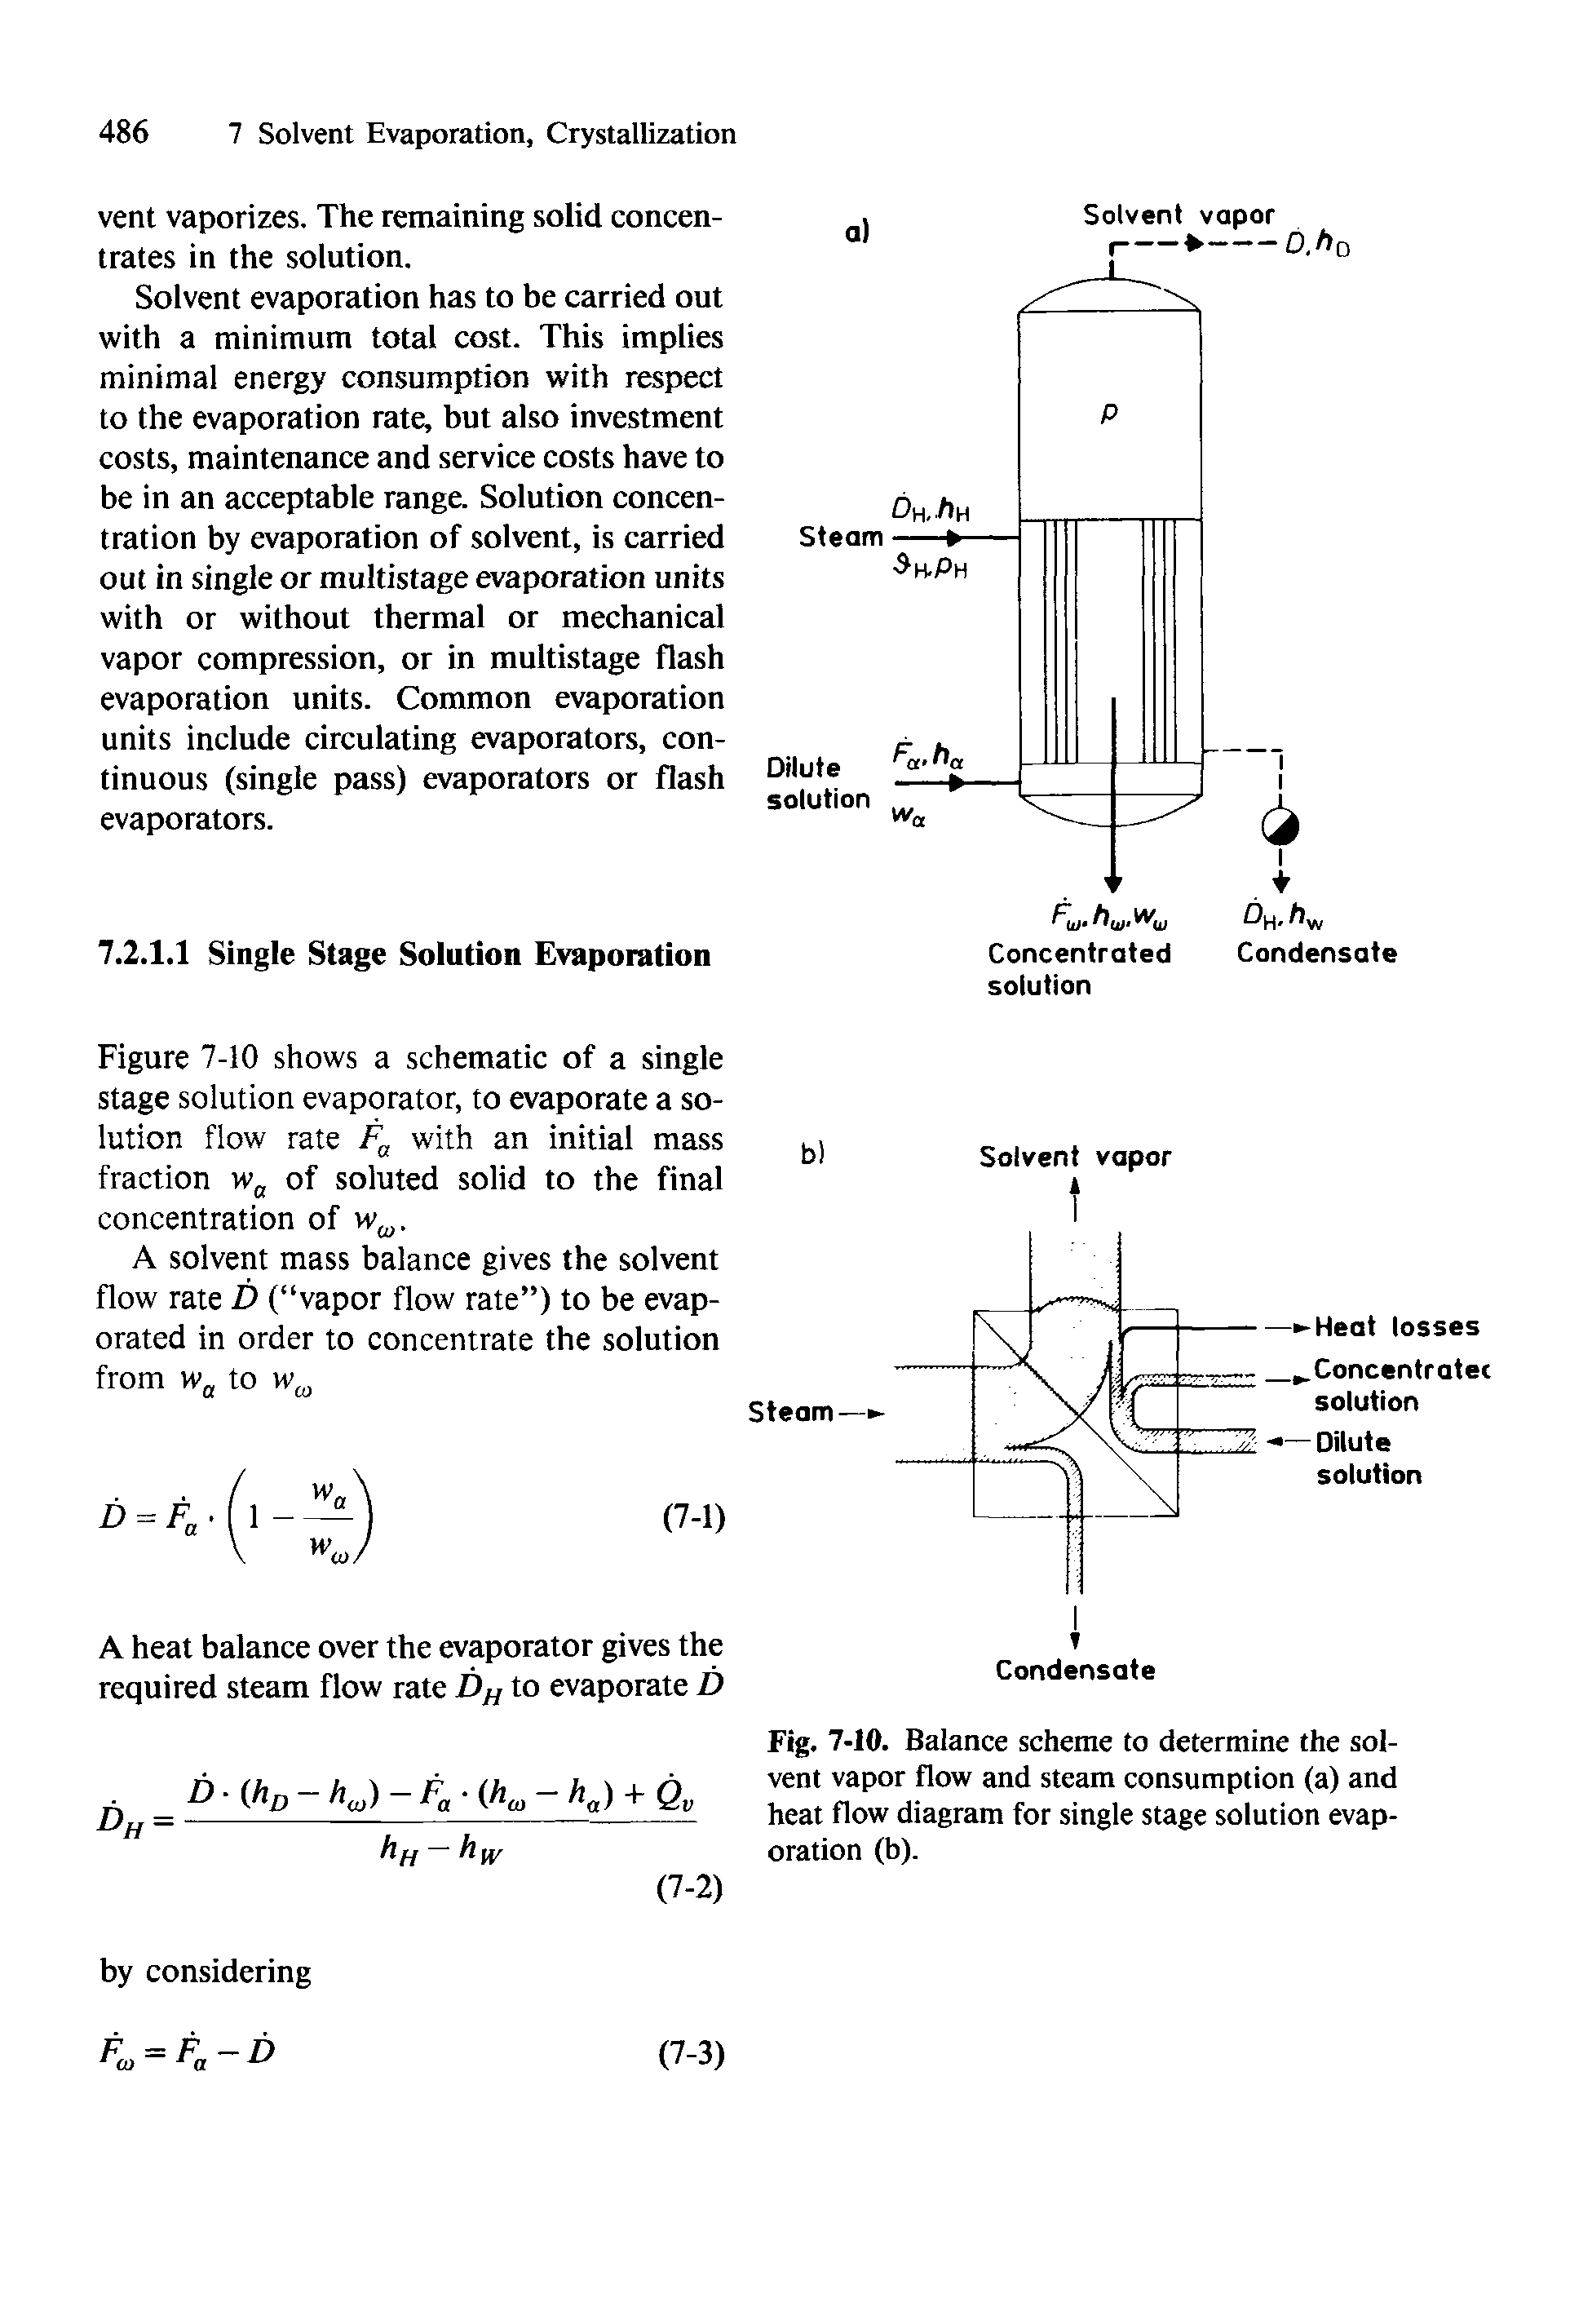 Fig. 7-10. Balance scheme to determine the solvent vapor flow and steam consumption (a) and heat flow diagram for single stage solution evaporation (b).